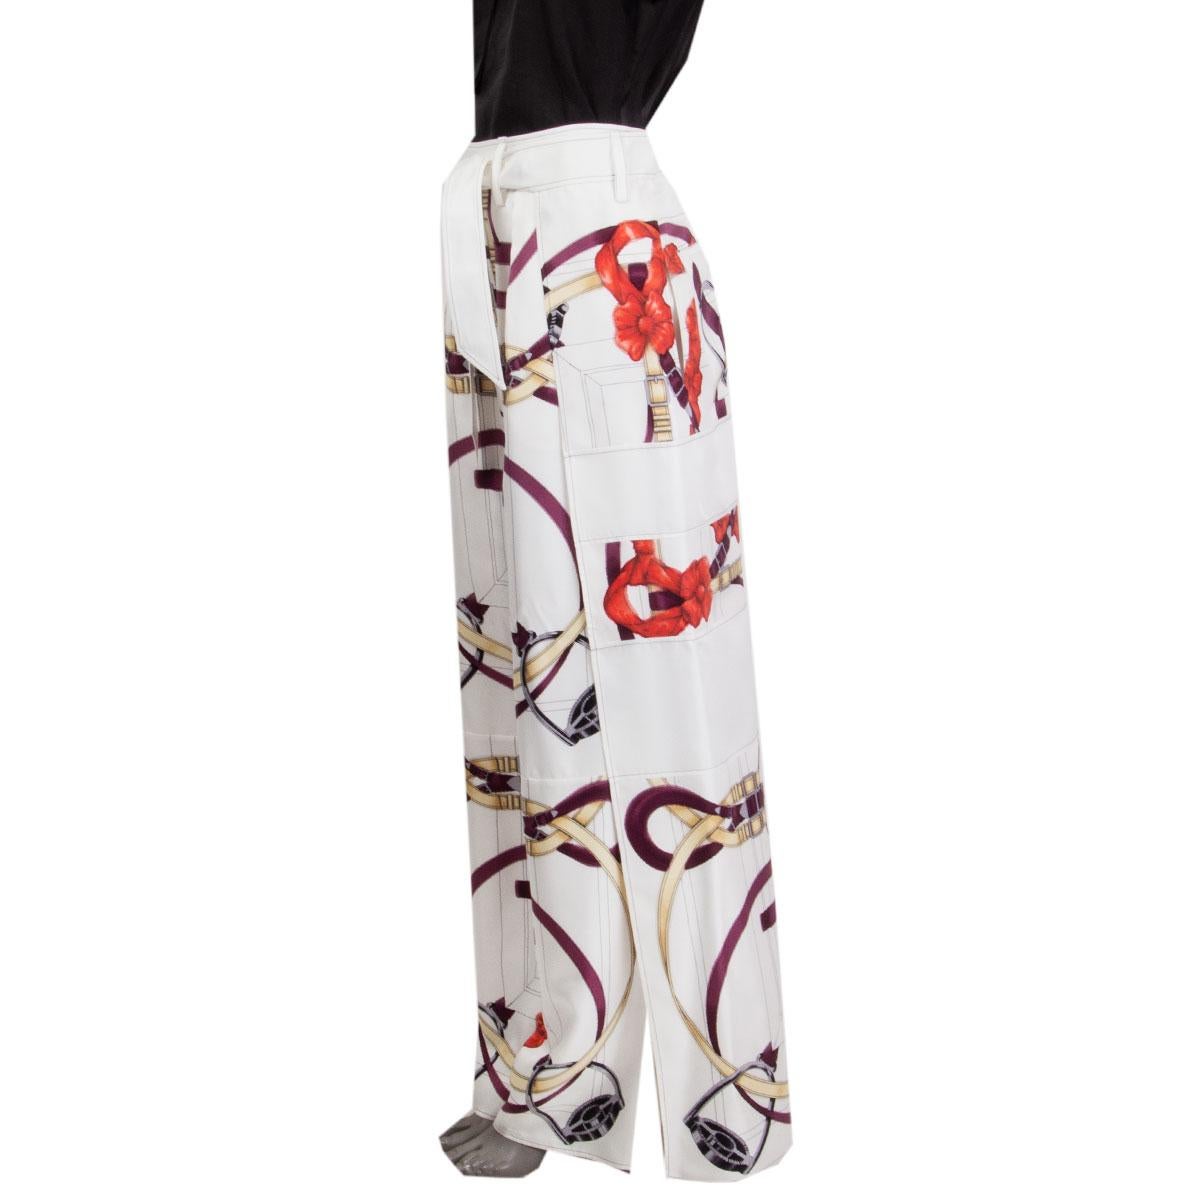 100% authentic Hermes layered palazzo pants in white silk (100%) with multicolored print. Closes with one button on both waist-line sides and with a silk belt. Lined in white silk (100%), has slit pockets on the side and patch pockets on the back.